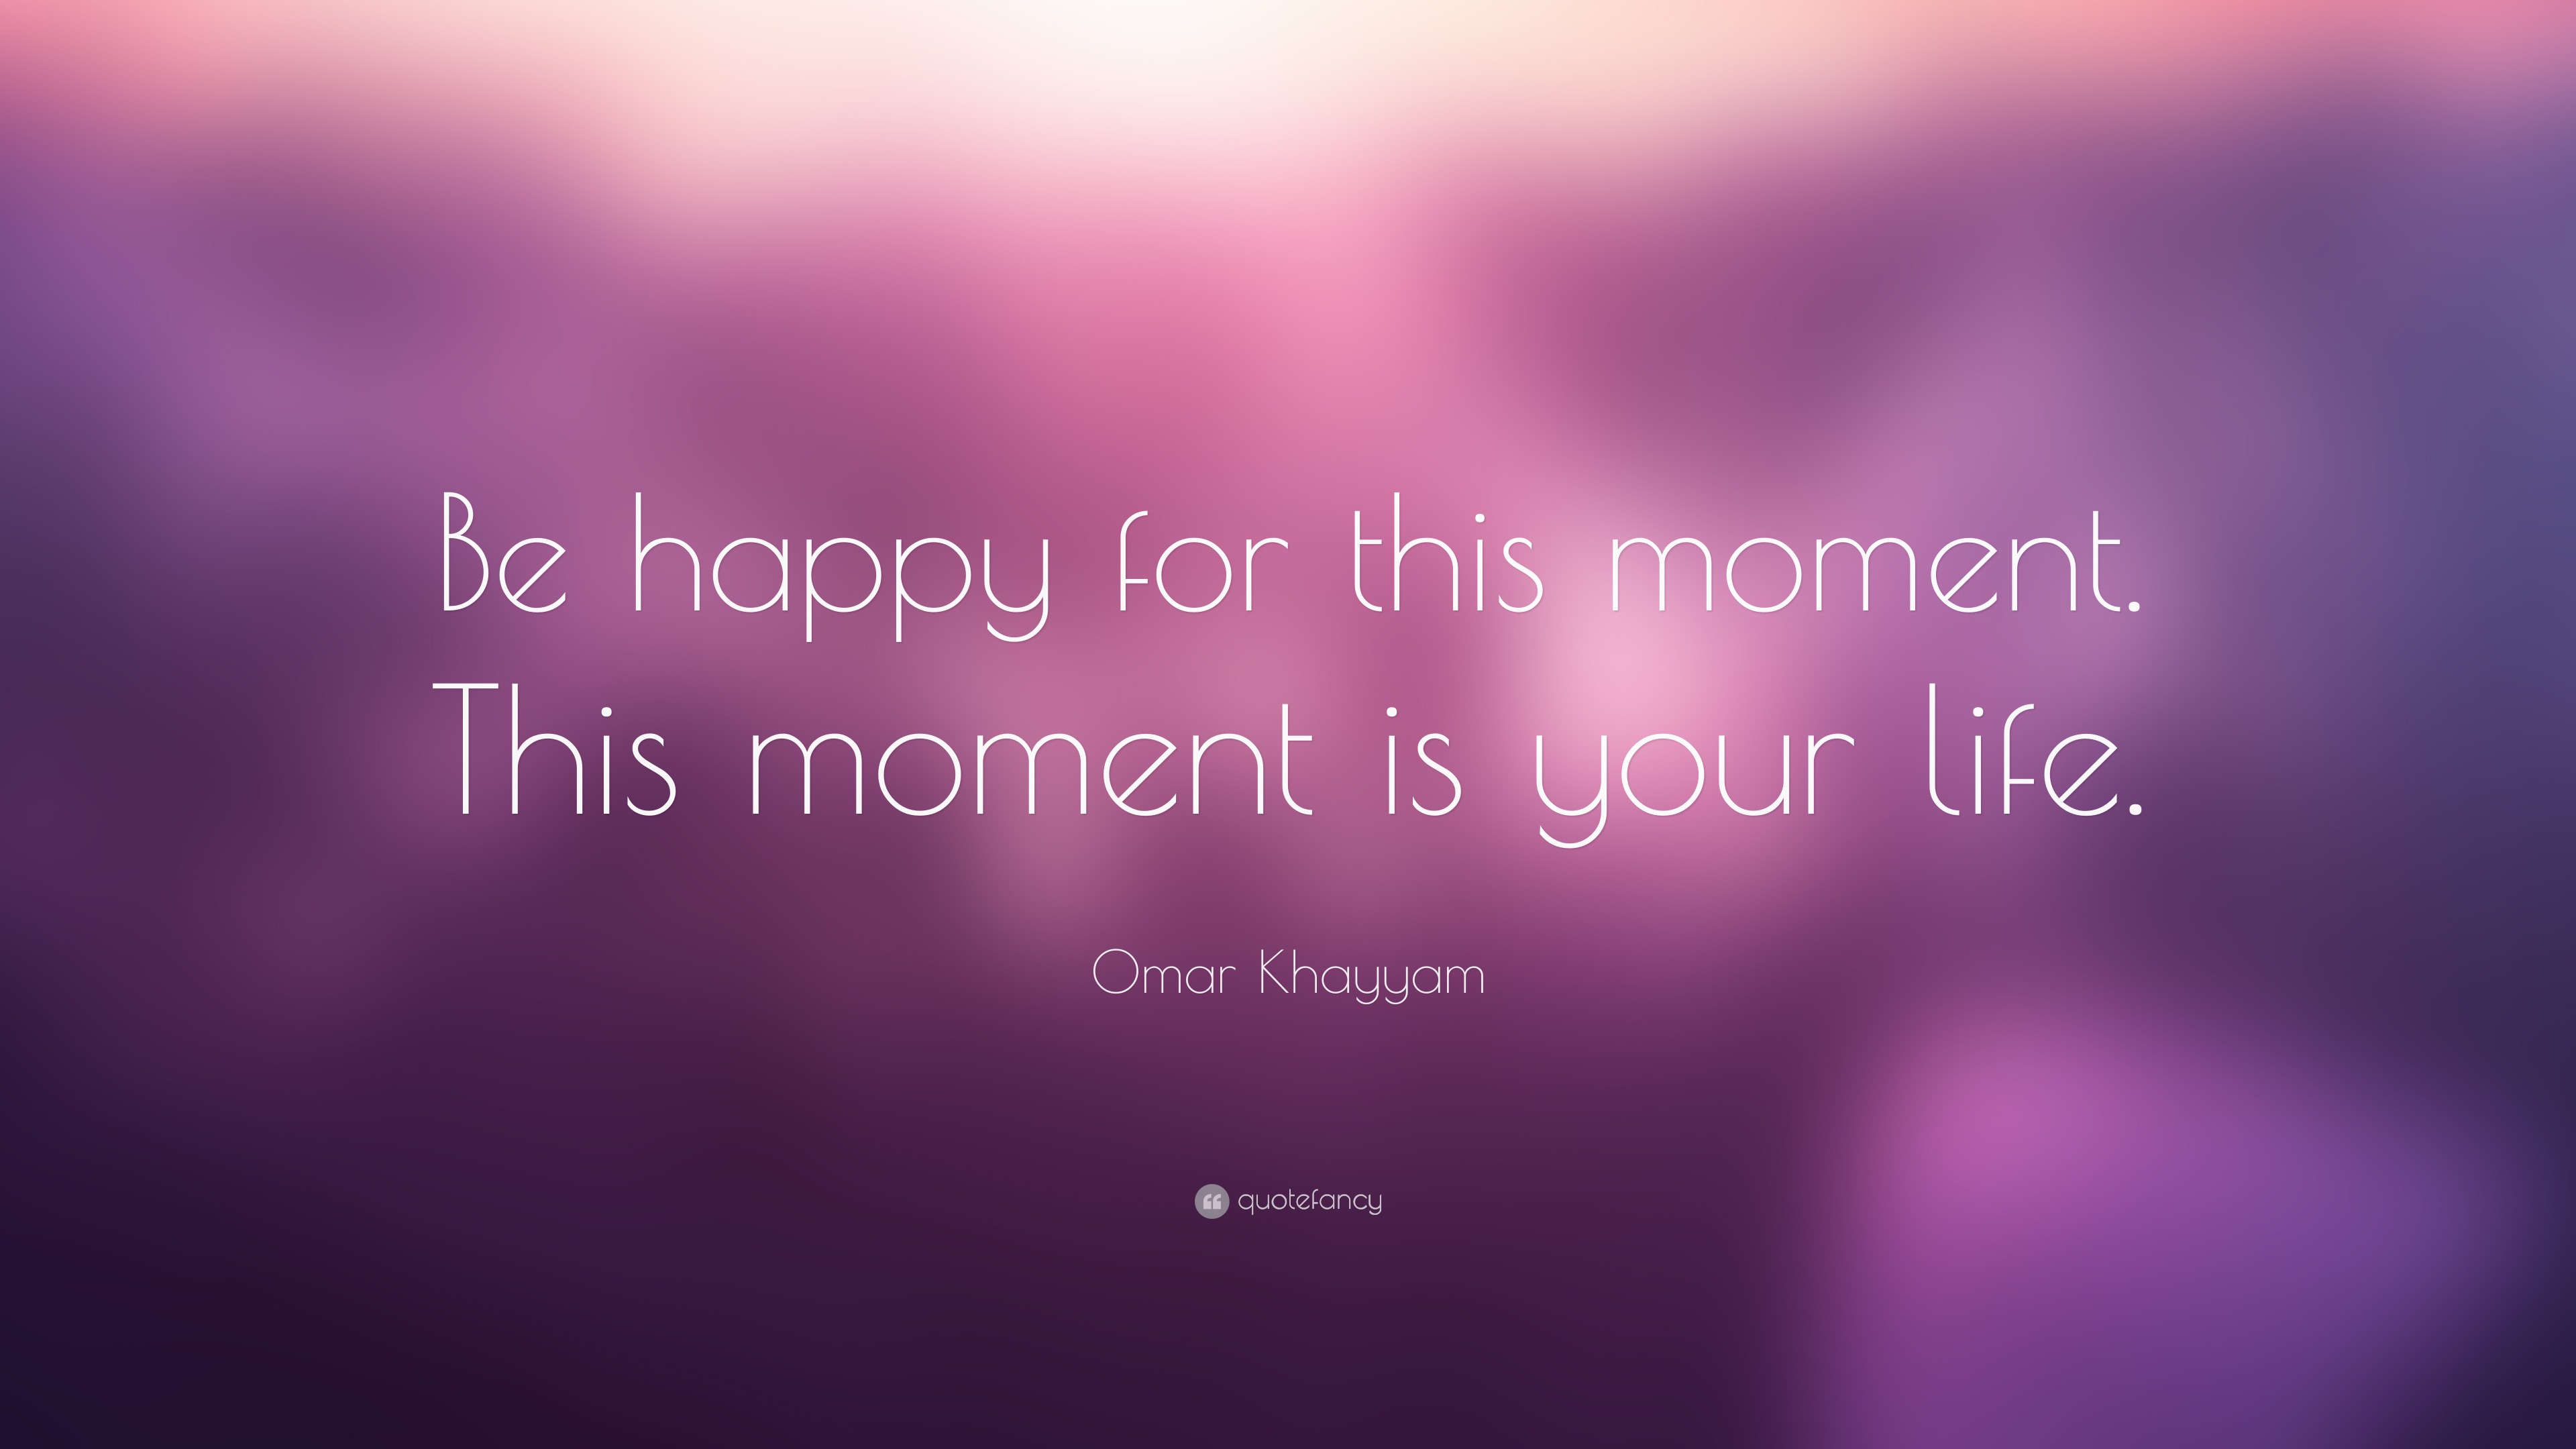 Omar Khayyam Quote: “Be happy for this moment. This moment is your life